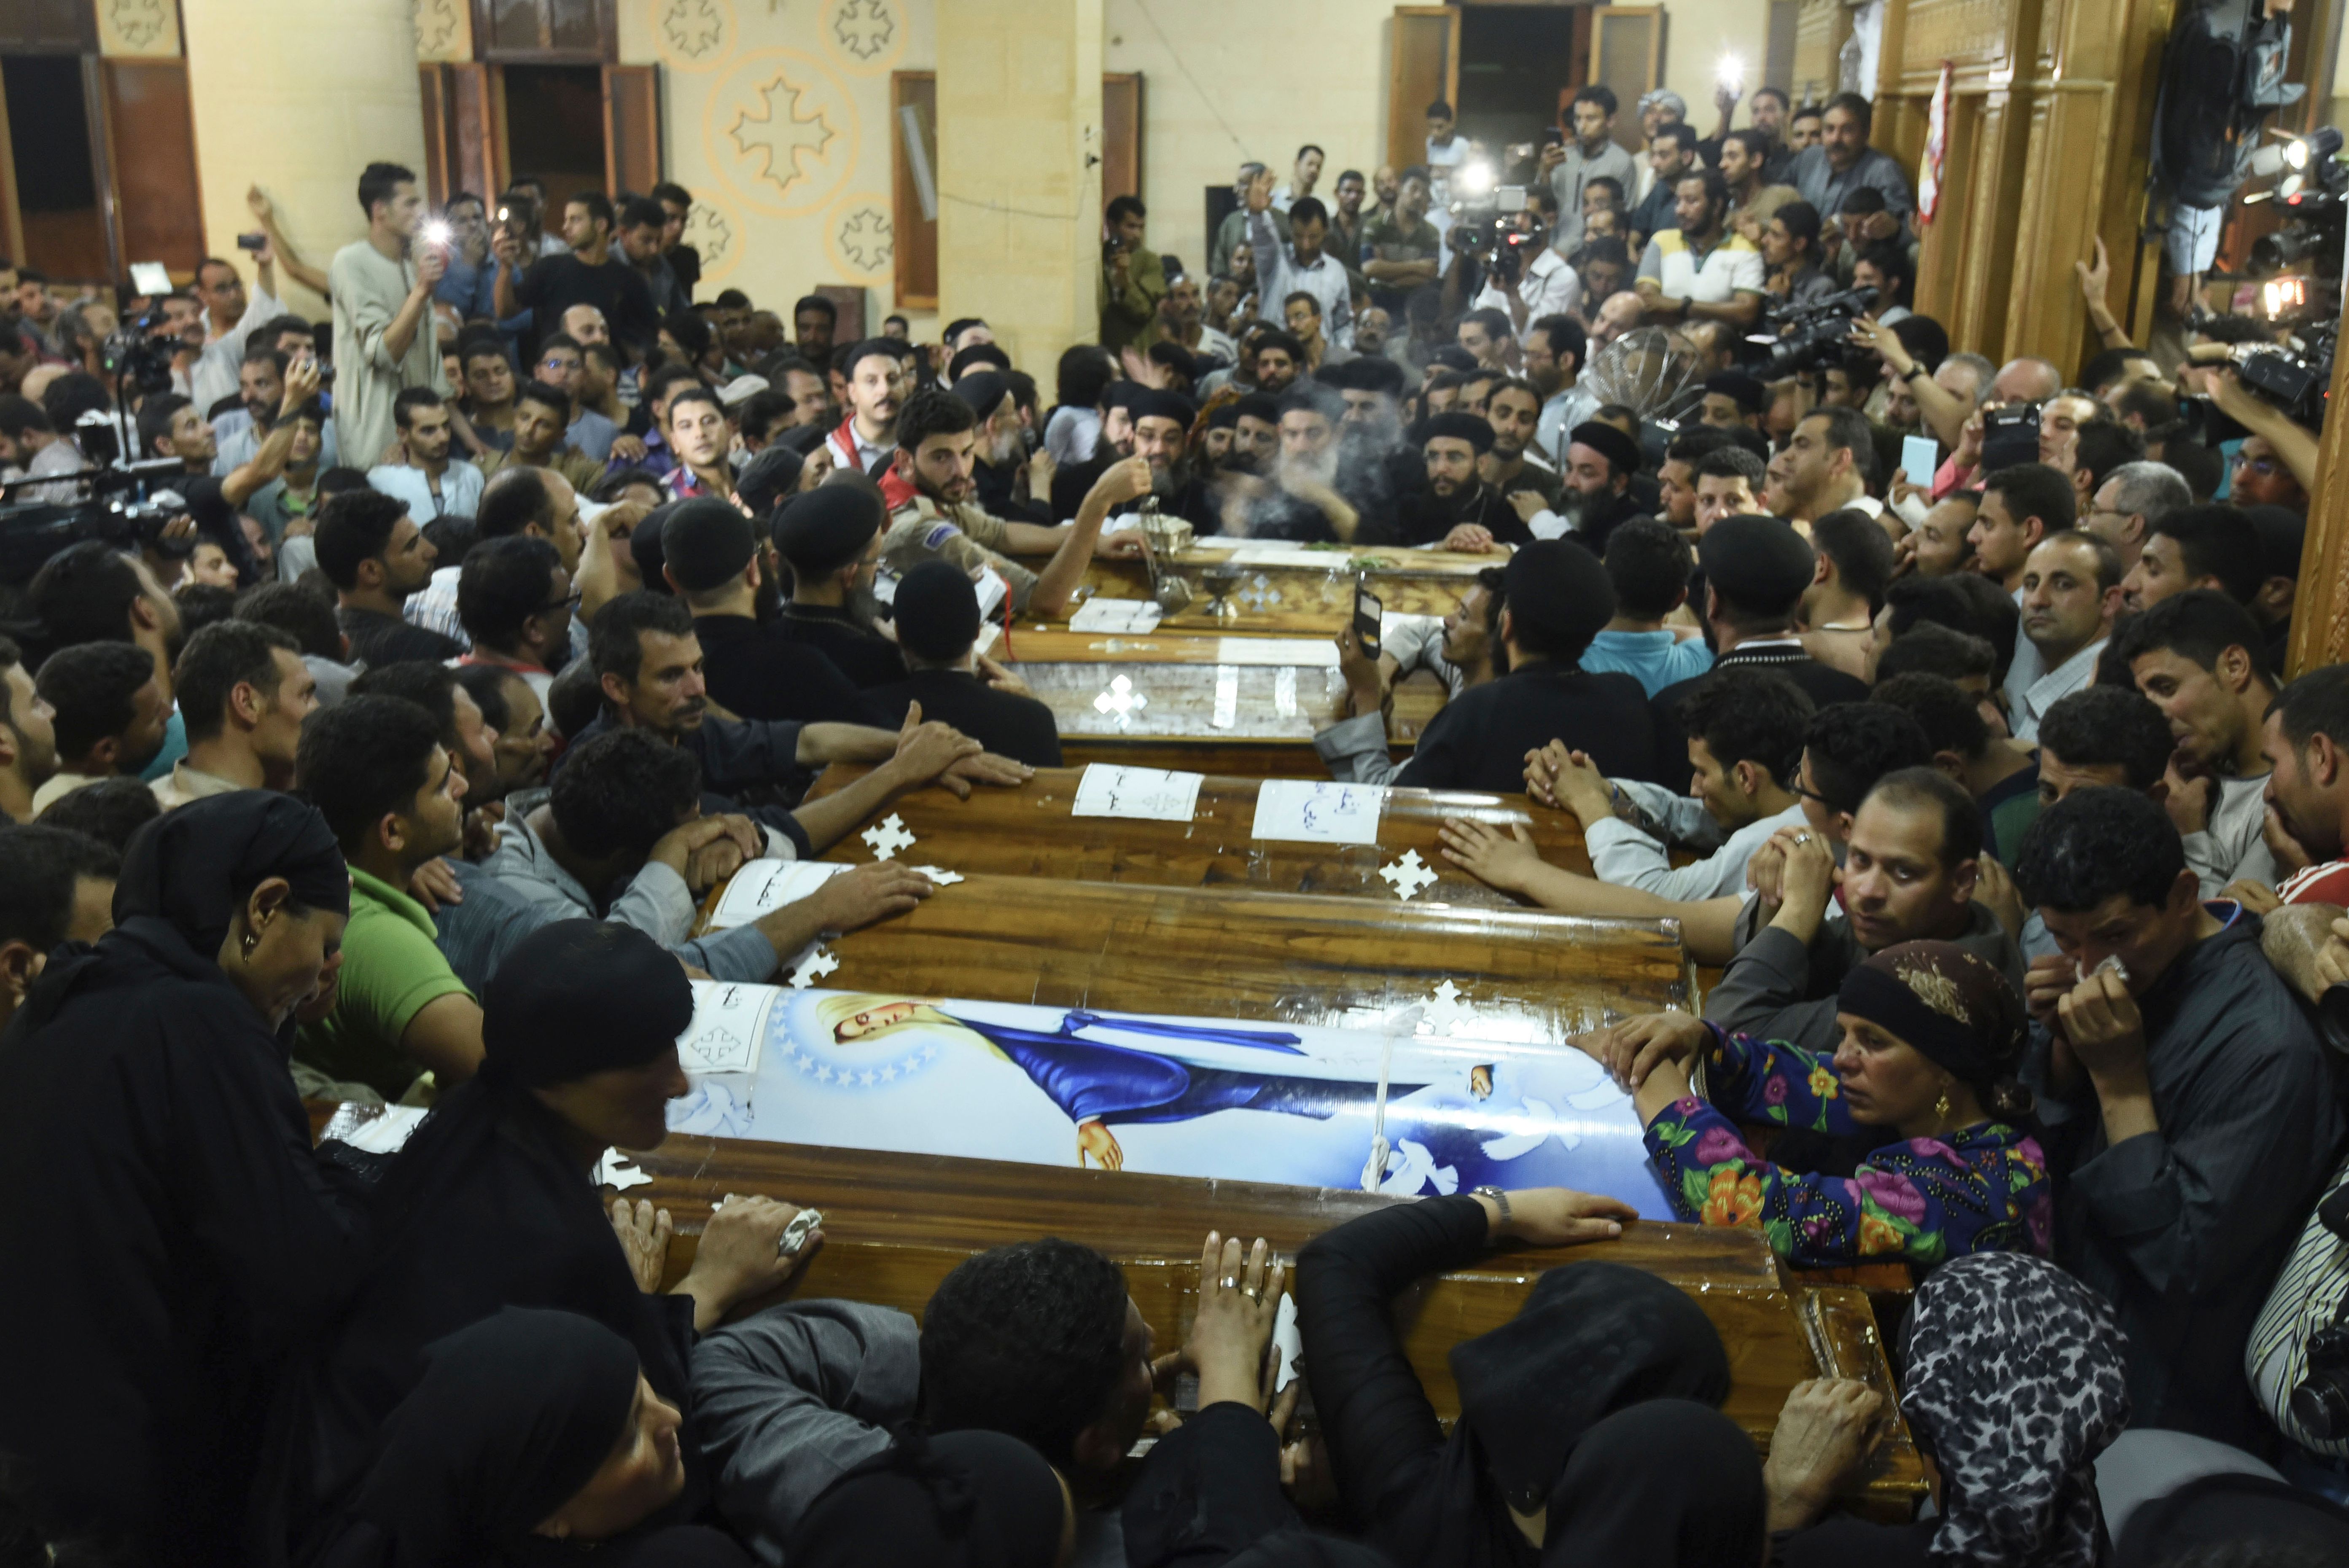 Relatives of killed Coptic Christians grieve by the coffins during the funeral at Abu Garnous Cathedral in the north Minya town of Maghagha, on May 26, 2017. (MOHAMED EL-SHAHED/AFP via Getty Images)